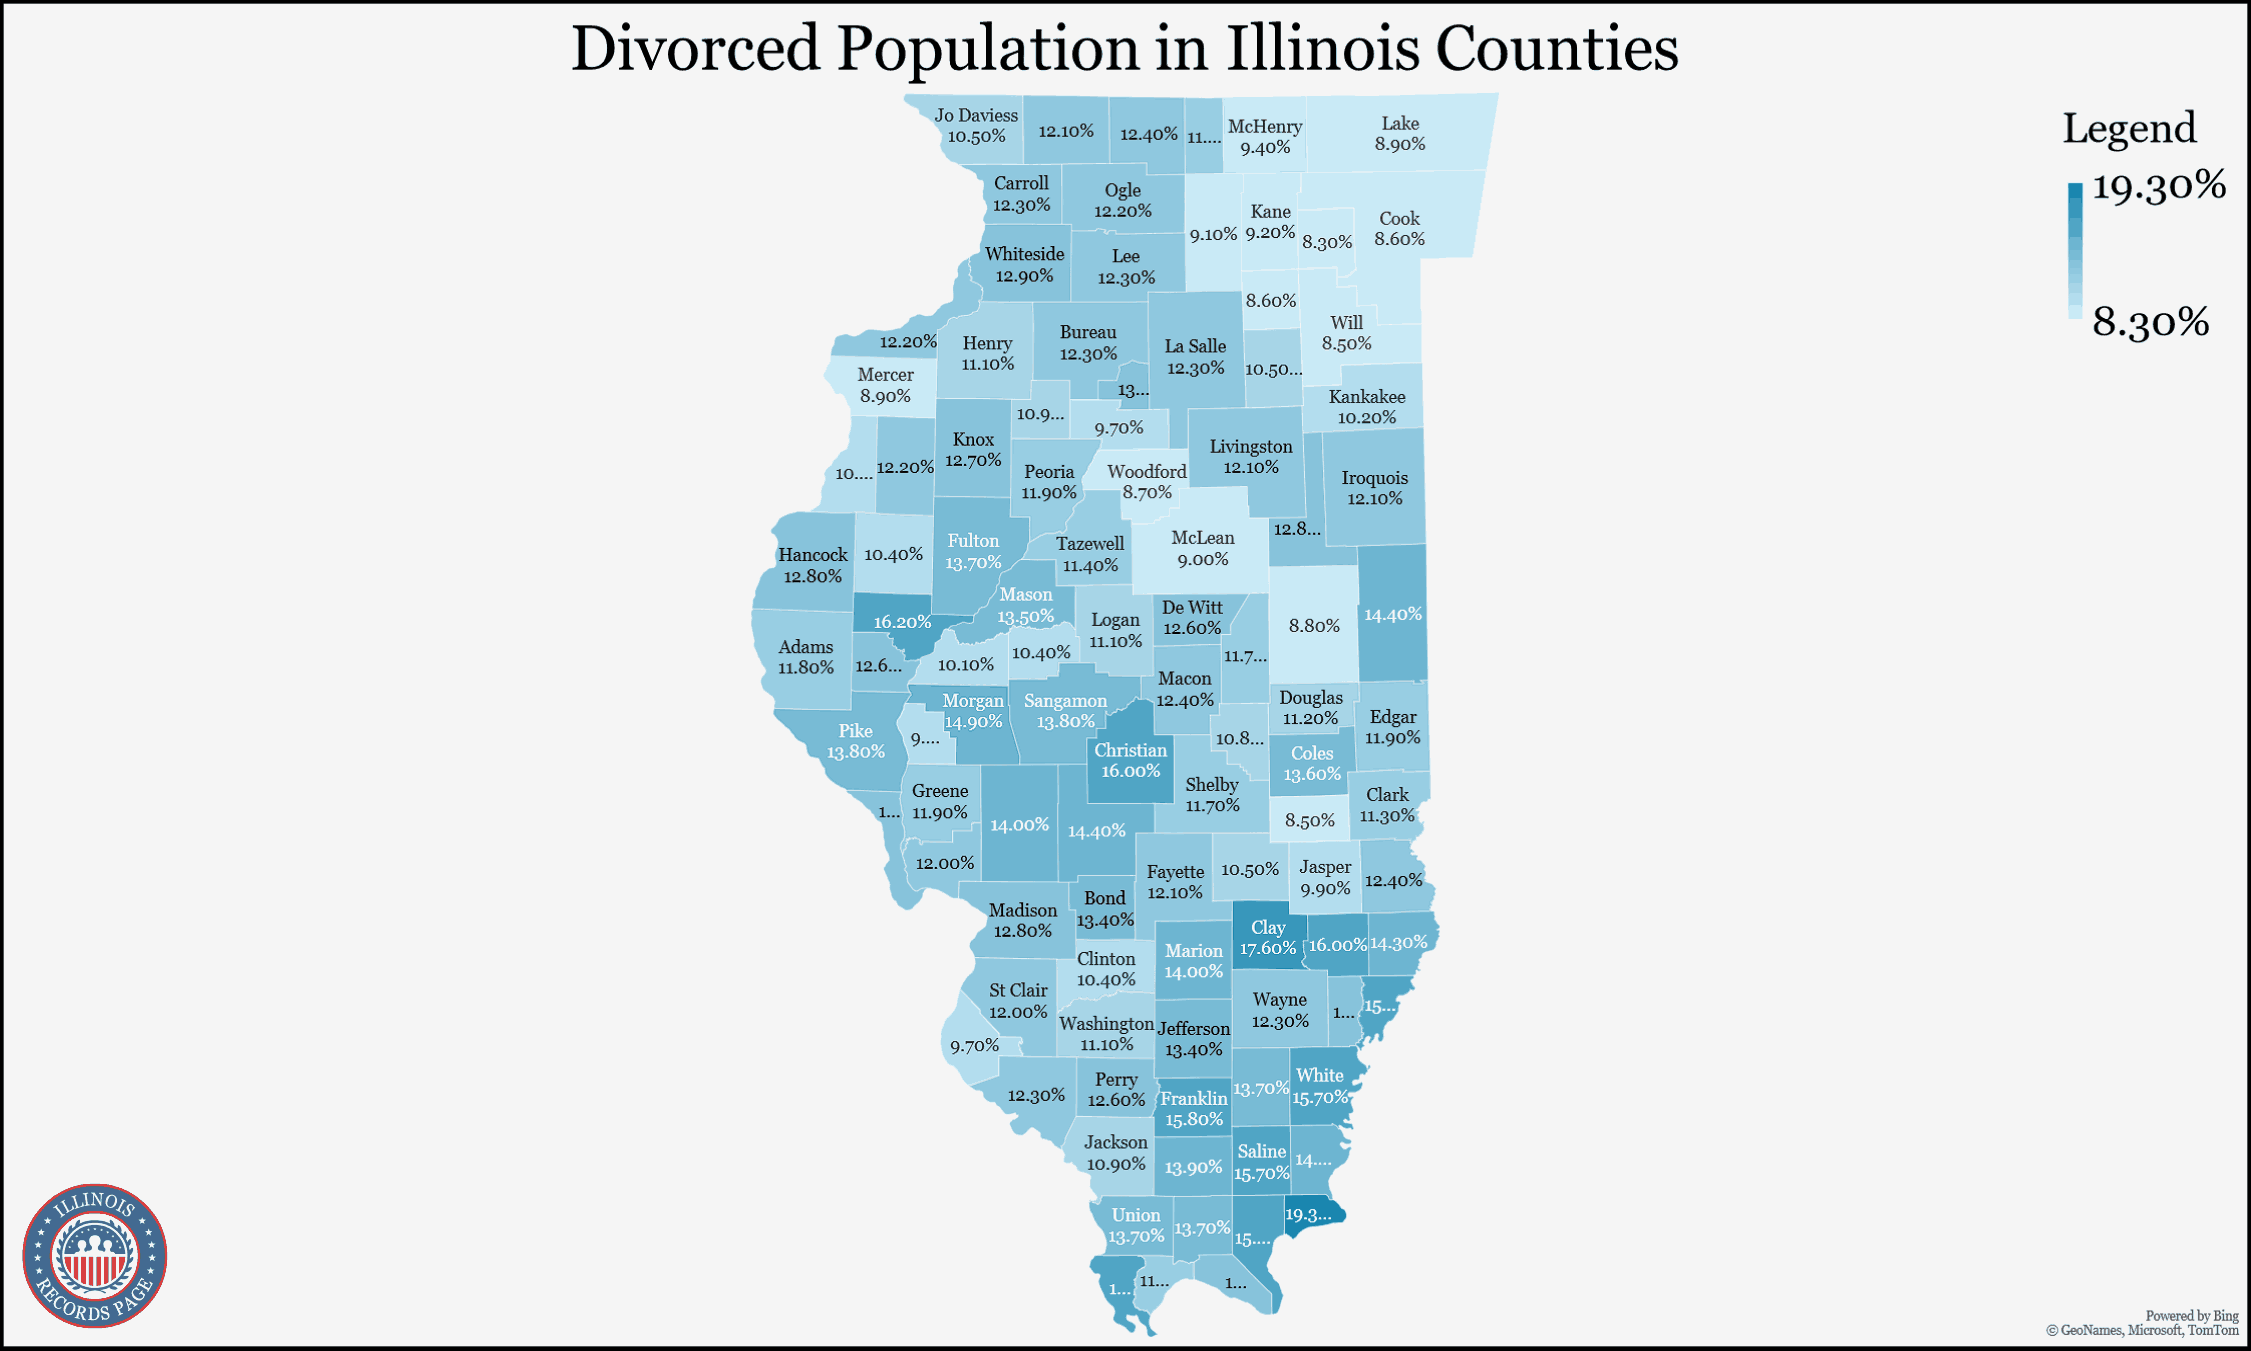 A map illustrating the percentage of divorced population in each county of Illinois is provided by the United States Census Bureau, with a legend located at the top right corner indicating that the highest percentage is 19.30% and the lowest is 8.30%.